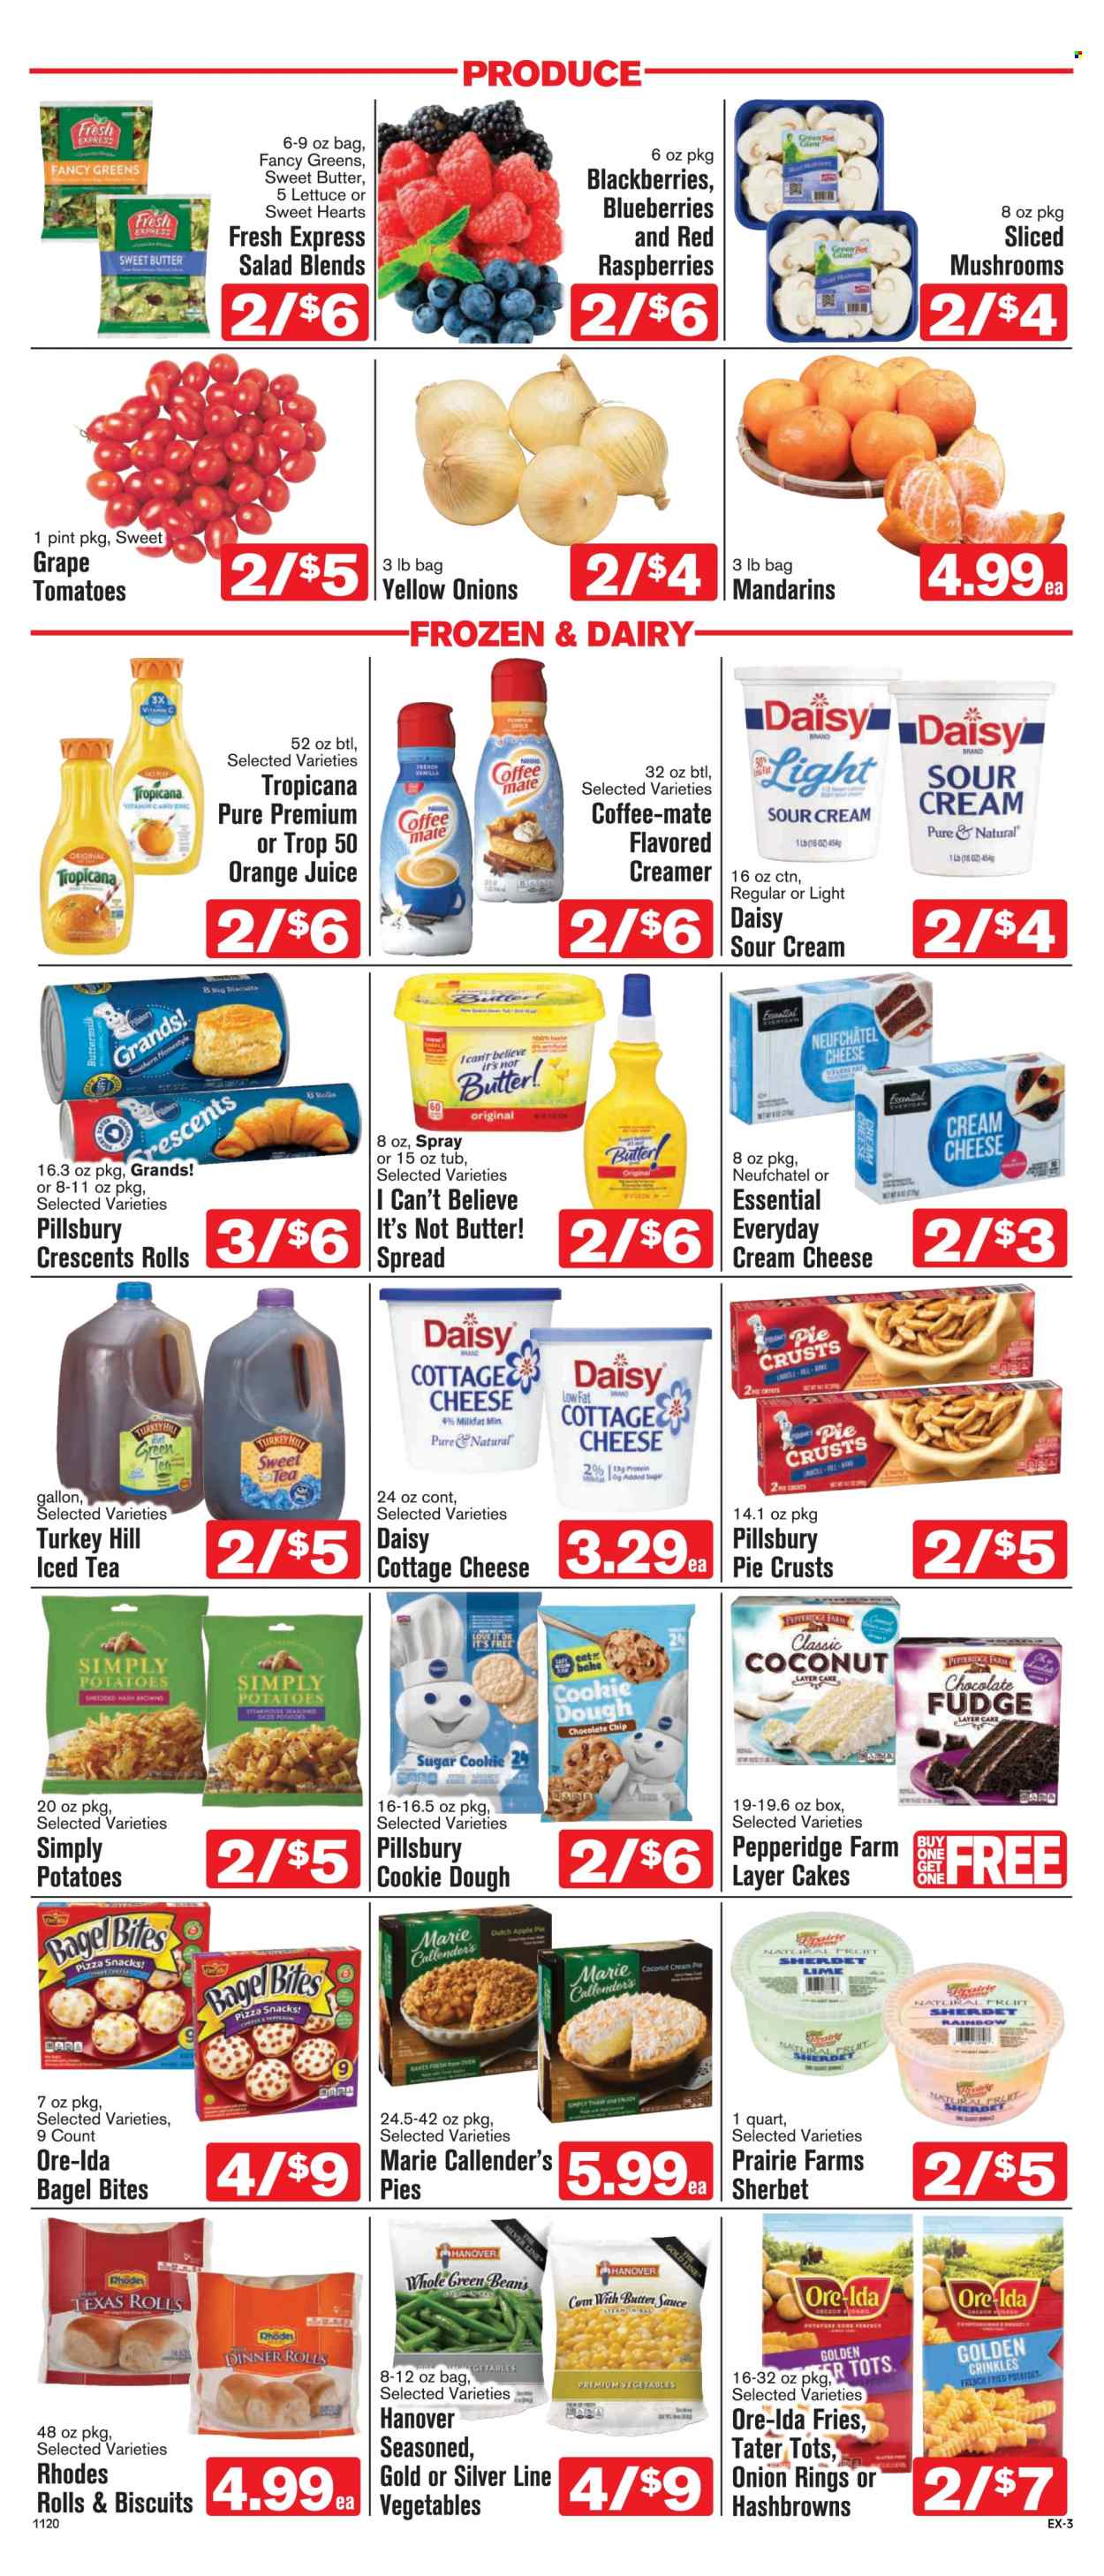 thumbnail - Shop ‘n Save Express Flyer - 11/20/2021 - 11/26/2021 - Sales products - bagels, pie, dinner rolls, apple pie, cream pie, green beans, potatoes, lettuce, salad, blackberries, blueberries, mandarines, coconut, diced potatoes, pizza, onion rings, Pillsbury, Marie Callender's, cottage cheese, Neufchâtel, buttermilk, Coffee-Mate, I Can't Believe It's Not Butter, sour cream, creamer, sherbet, hash browns, potato fries, Ore-Ida, tater tots, cookie dough, fudge, chocolate chips, snack, biscuit, pie crust, spice, orange juice, juice, ice tea. Page 3.